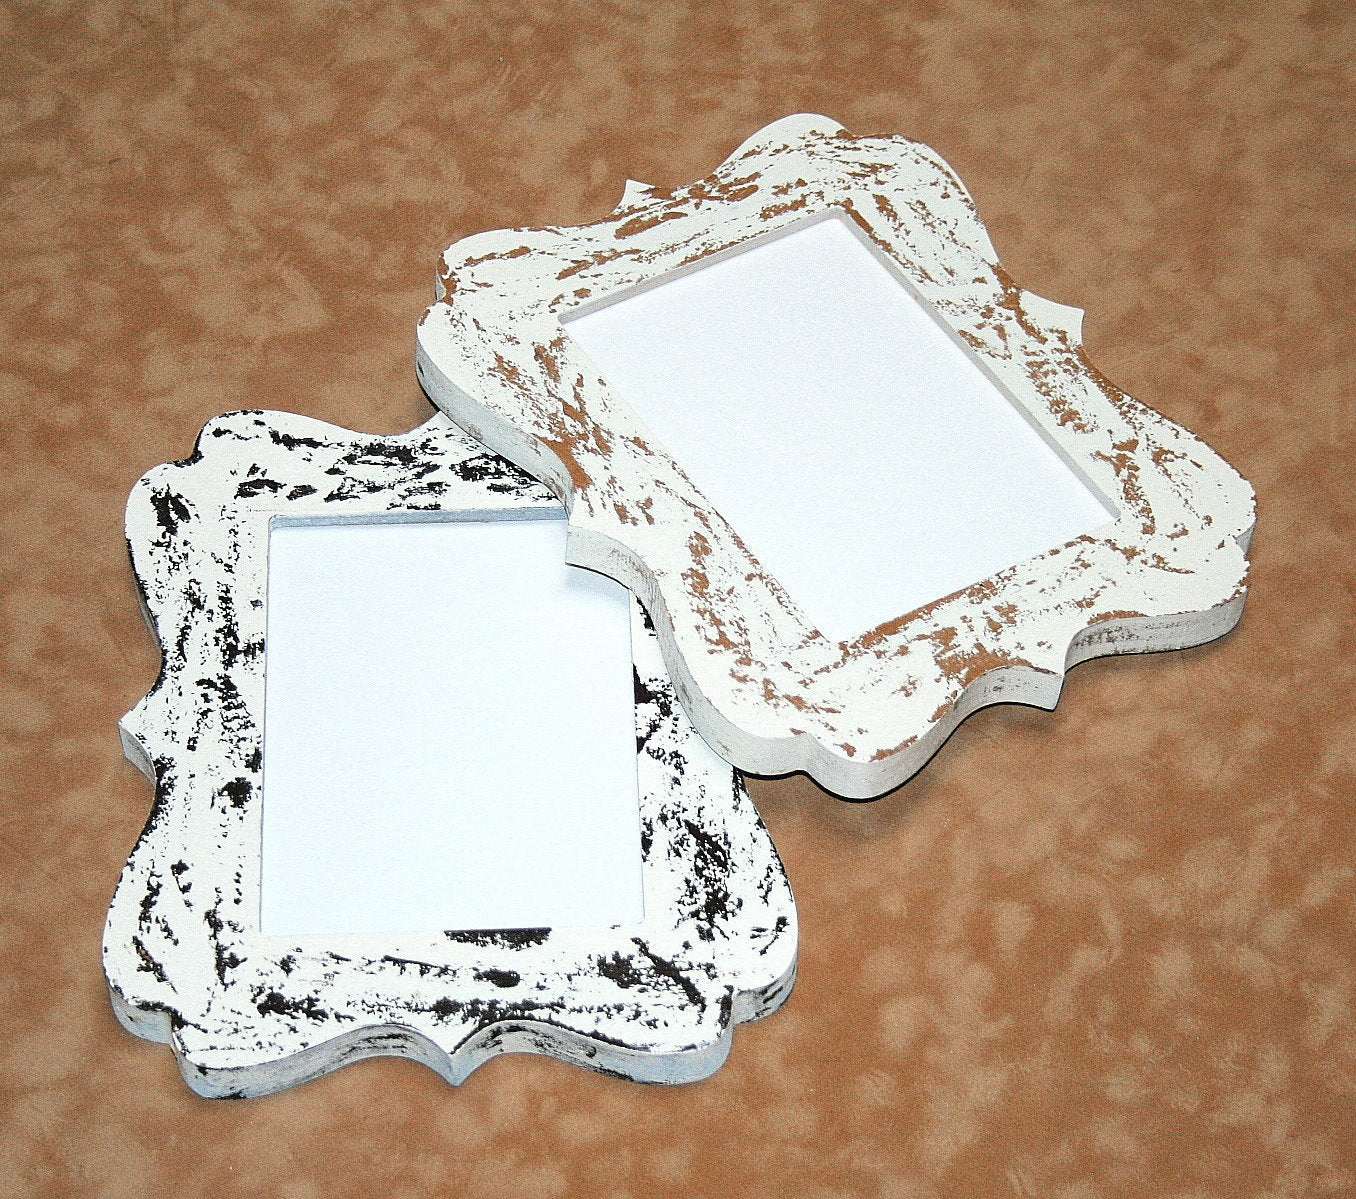 Shabby Picture frame Whimsical 8x8, 8x10, 8.5x11 or 8x12 in our 